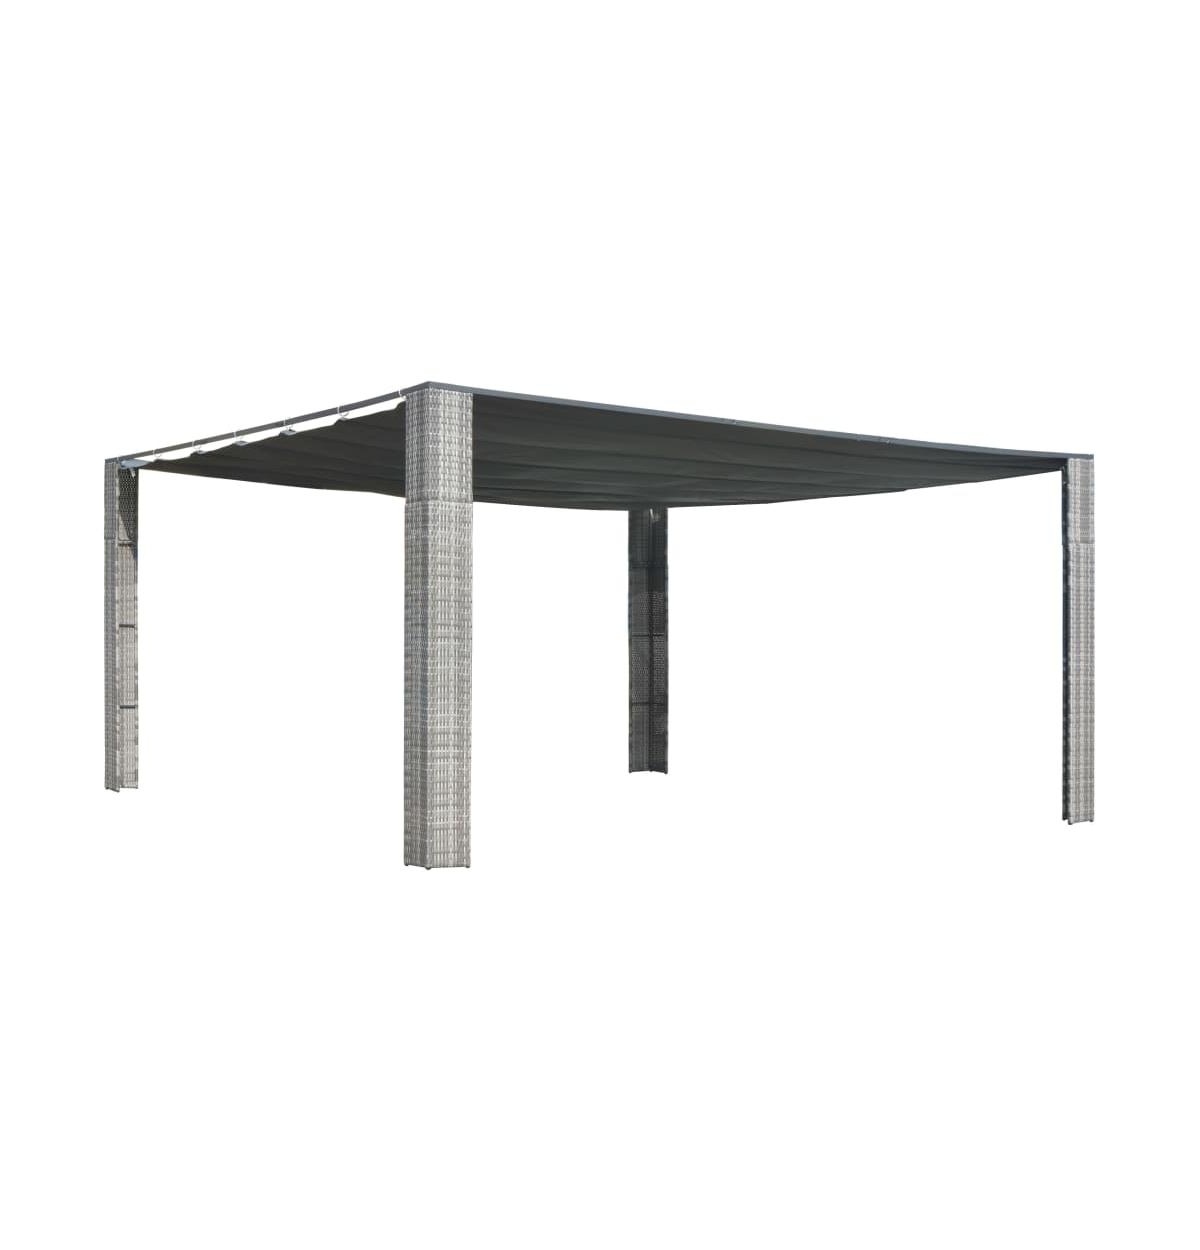 Gazebo with Sliding Roof Poly Rattan 157.4"x157.4"x78.7" Gray and Anthracite - Grey